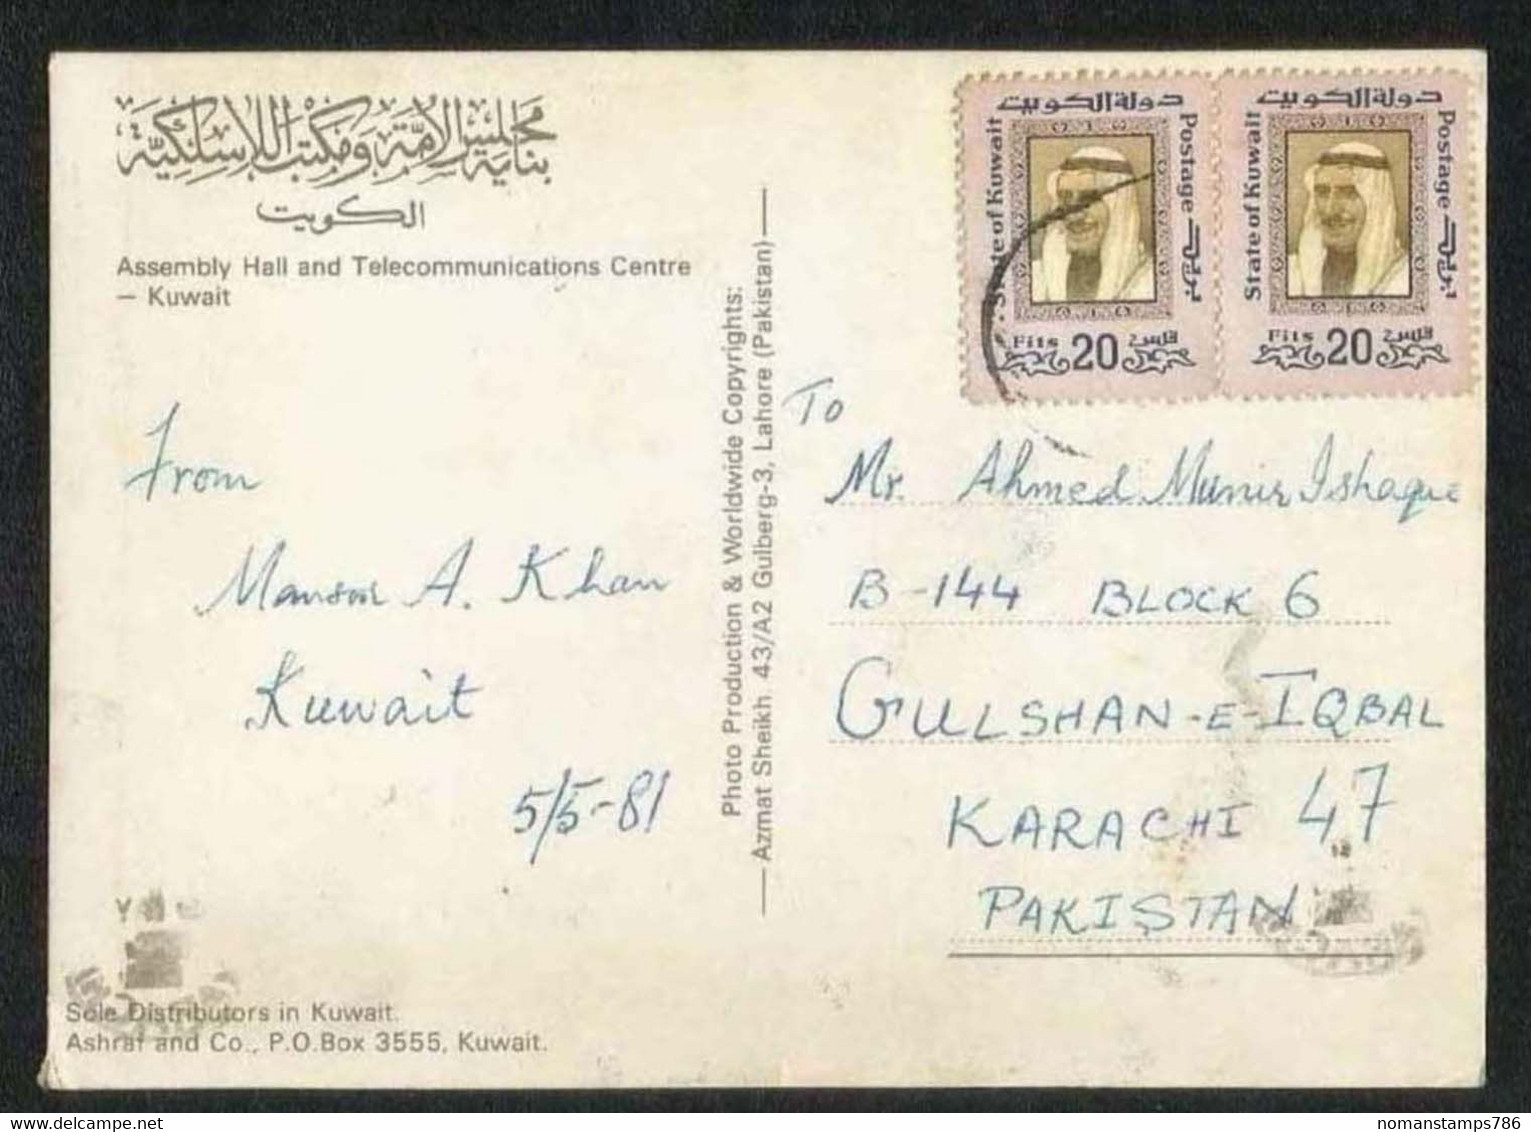 Kuwait 3 D Picture Postcard Assembly Hall & Telecommunications Centre 1981 Postal Used With Stamps - Kuwait